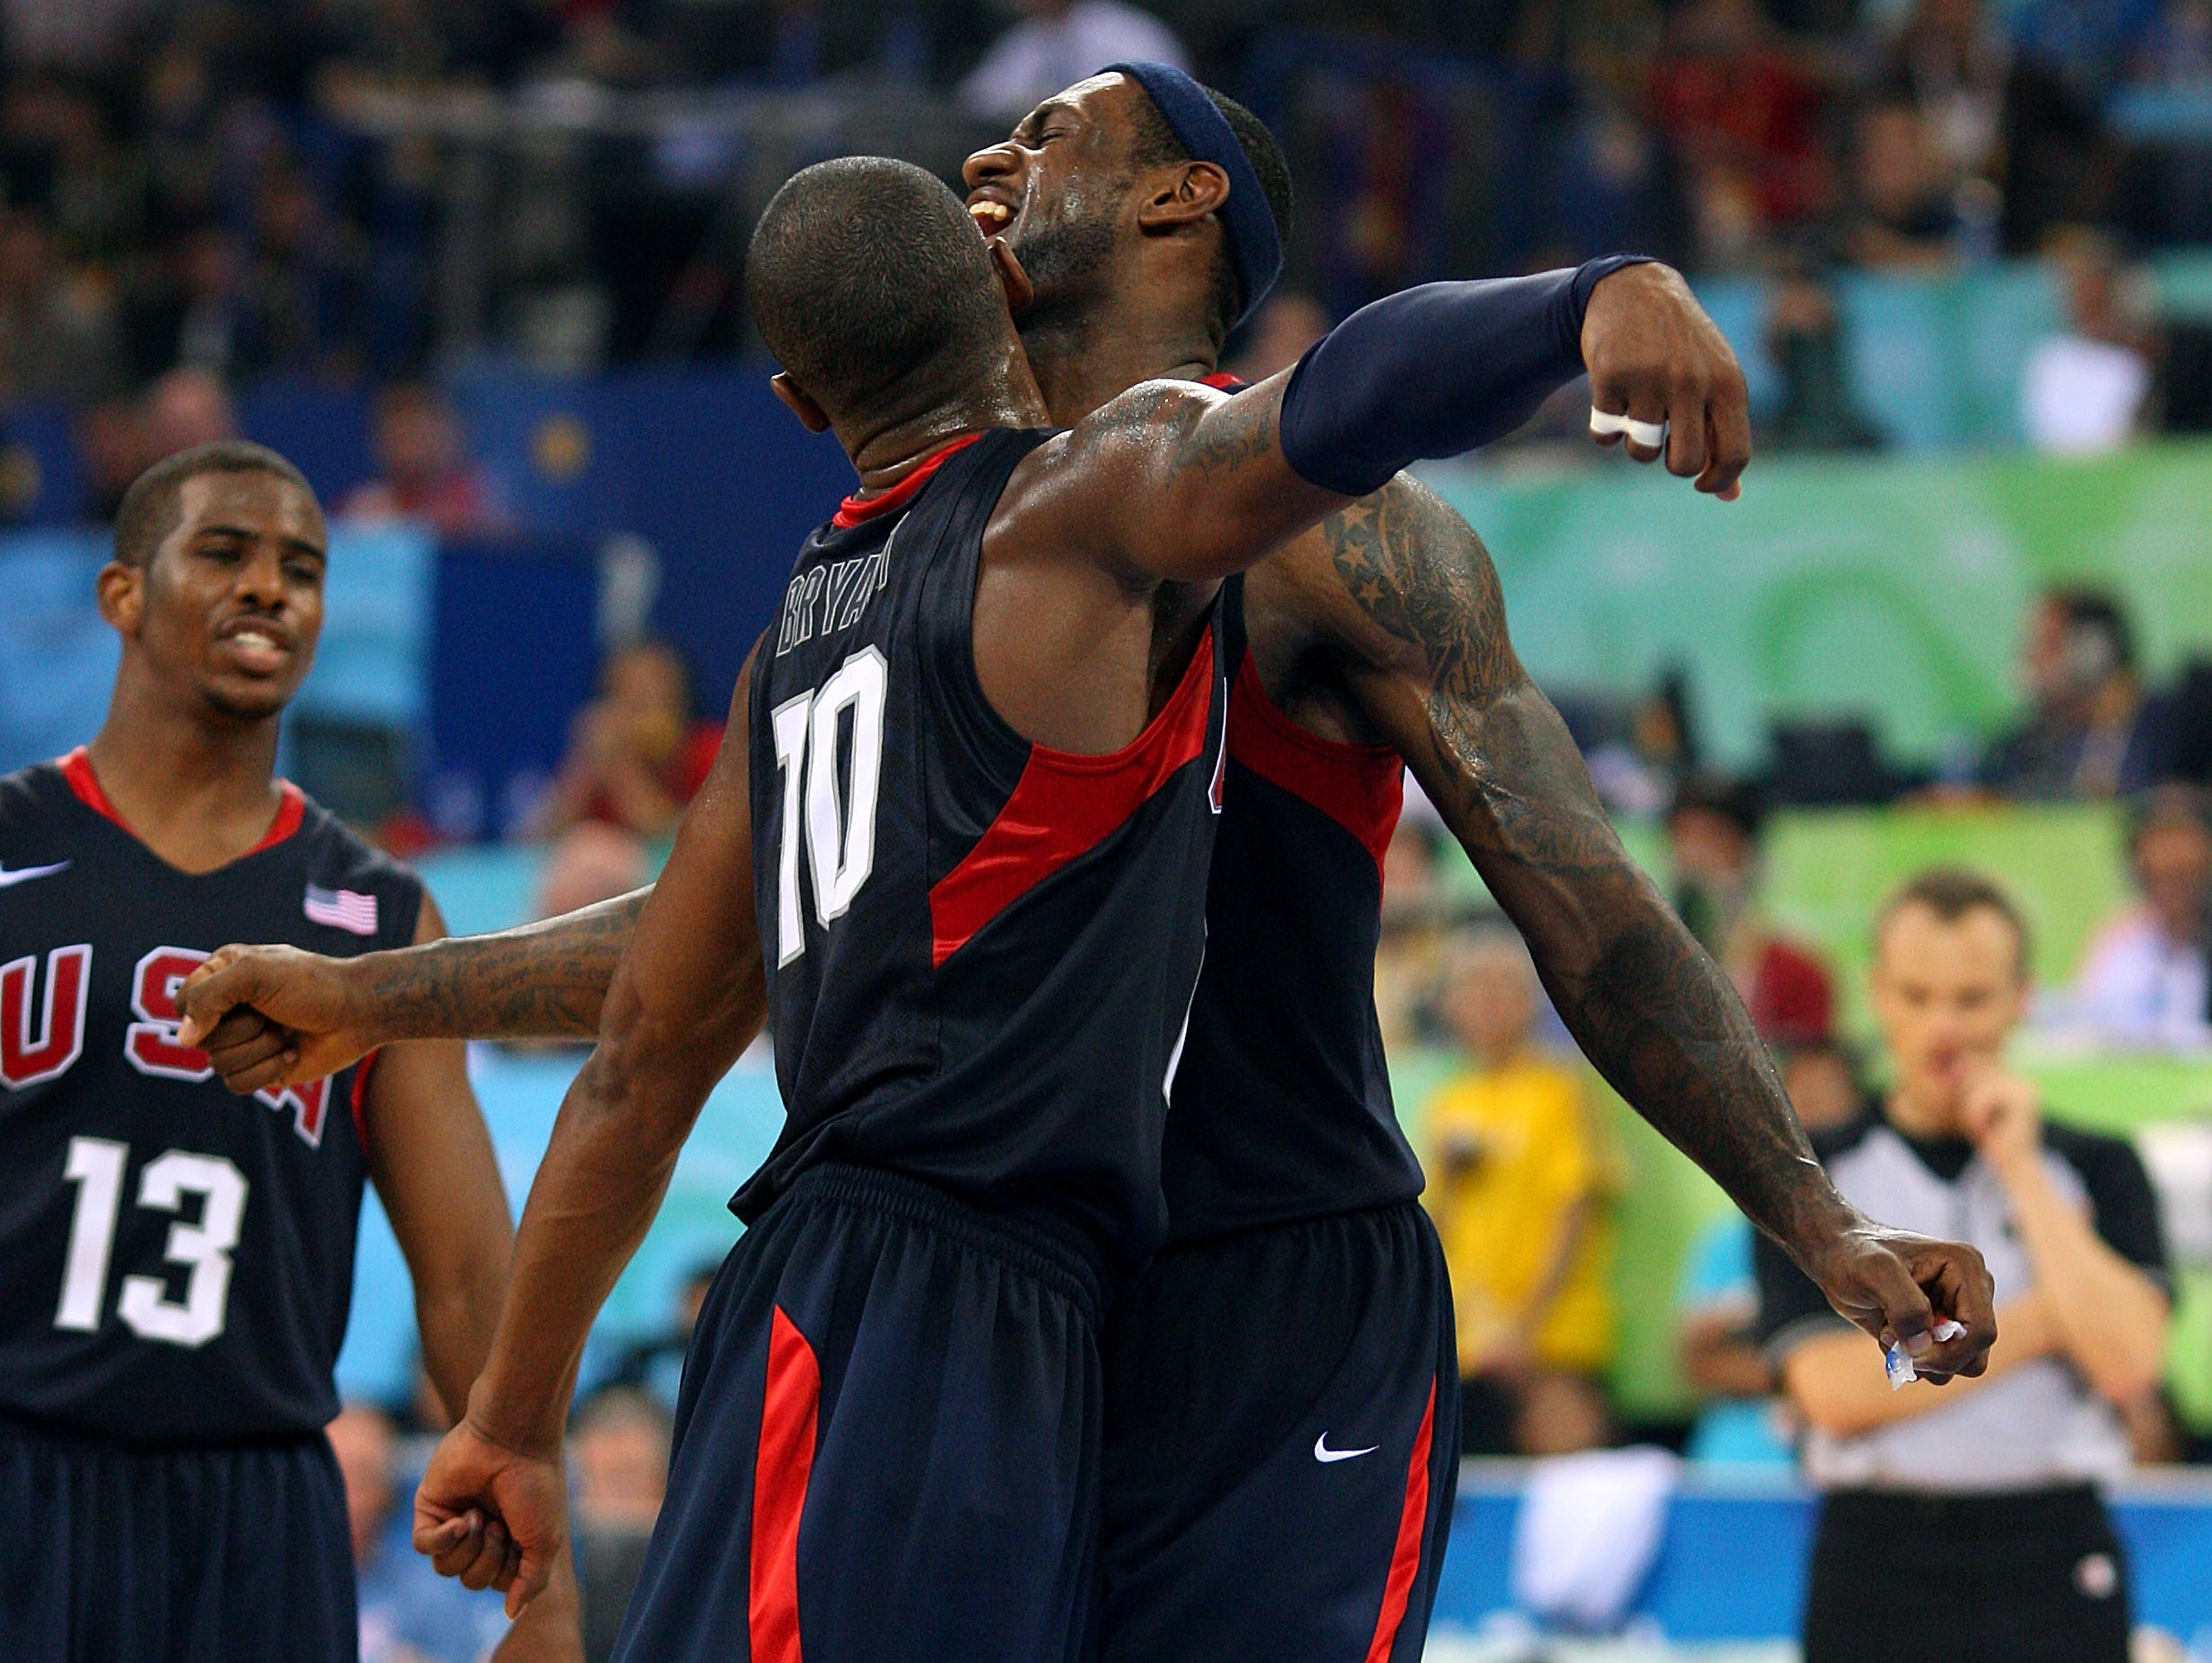 BEIJING - AUGUST 24:  LeBron James #6 Kobe Bryant #10 and Chris Paul #13 of the United States celebrate after defeating Spain 118-107 in the gold medal game during Day 16 of the Beijing 2008 Olympic Games at the Beijing Olympic Basketball Gymnasium on Aug